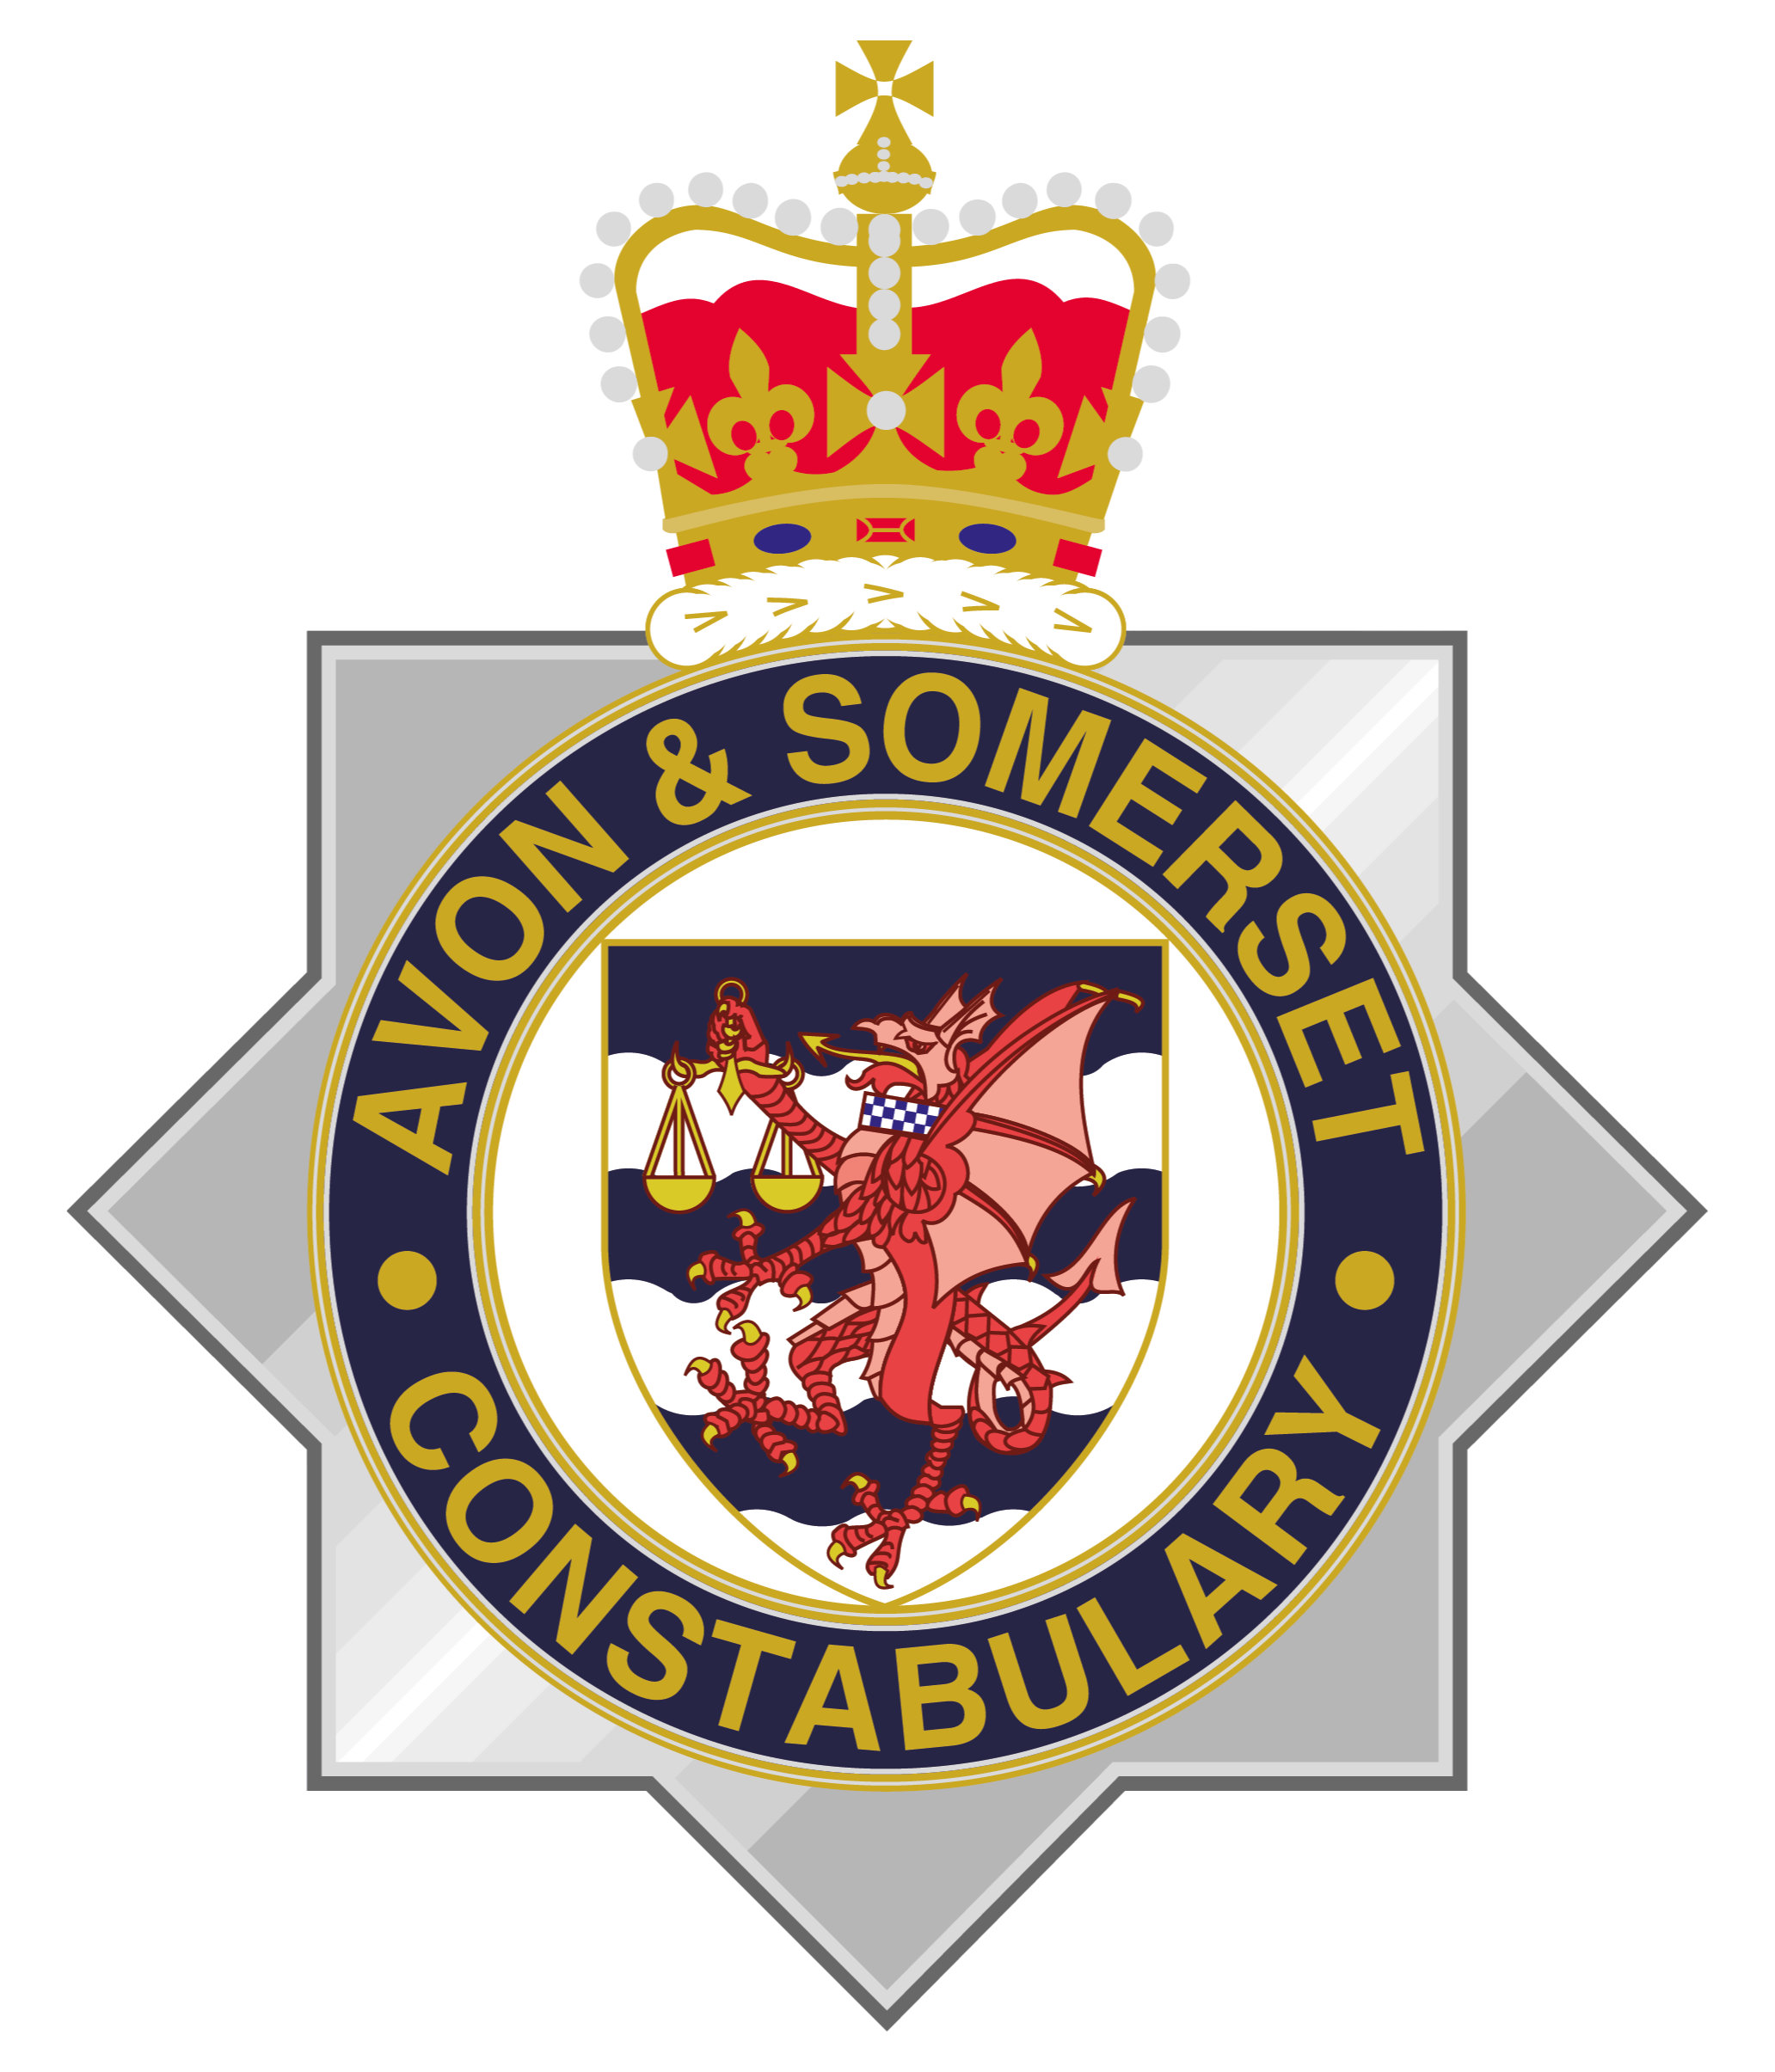 Managed by Avon and Somerset Constabulary